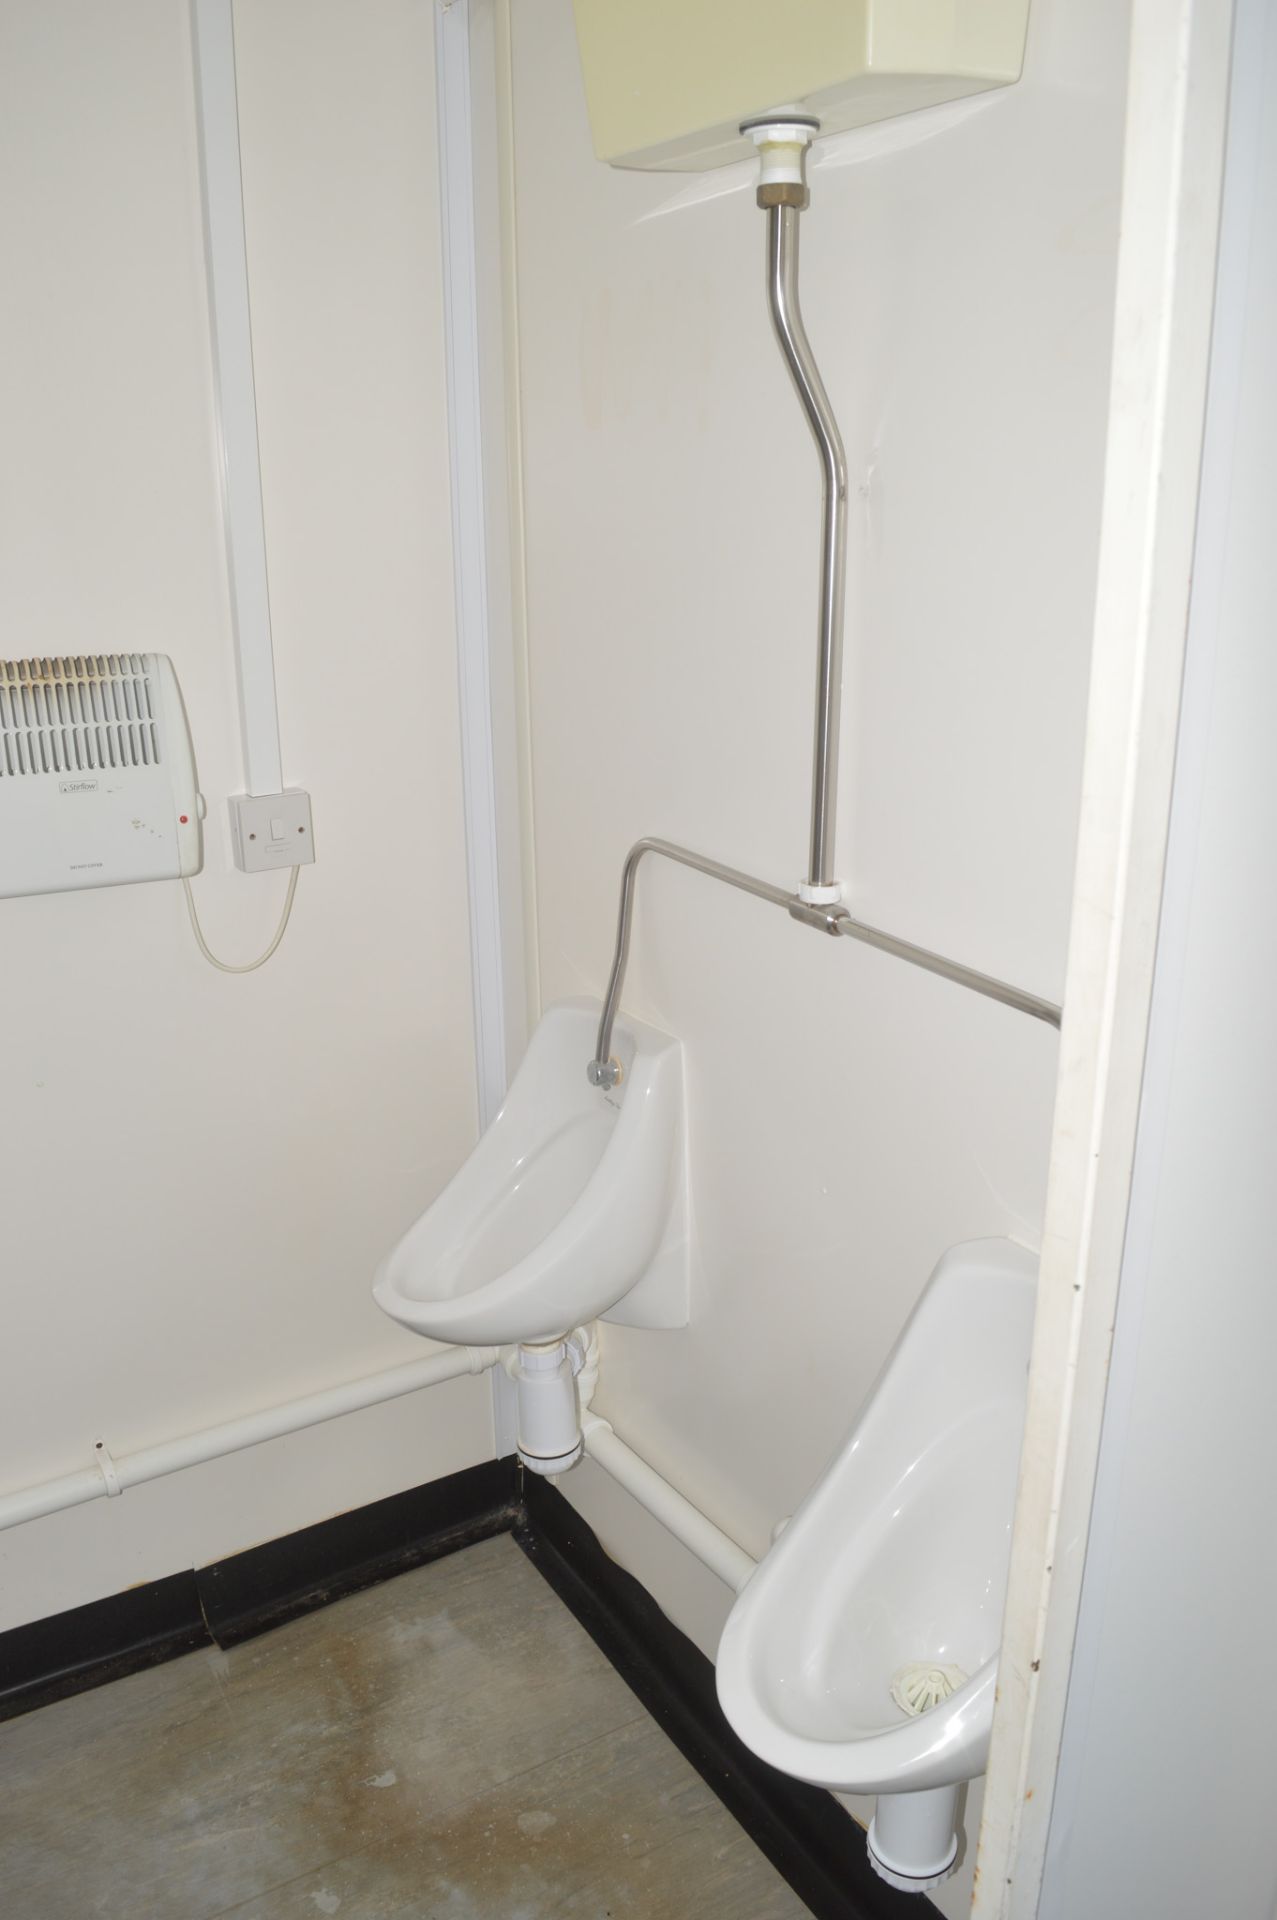 12 ft x 8 ft jack leg steel anti vandal toilet block  Comprising 2 cubicle toilets, 2 urinals and - Image 6 of 8